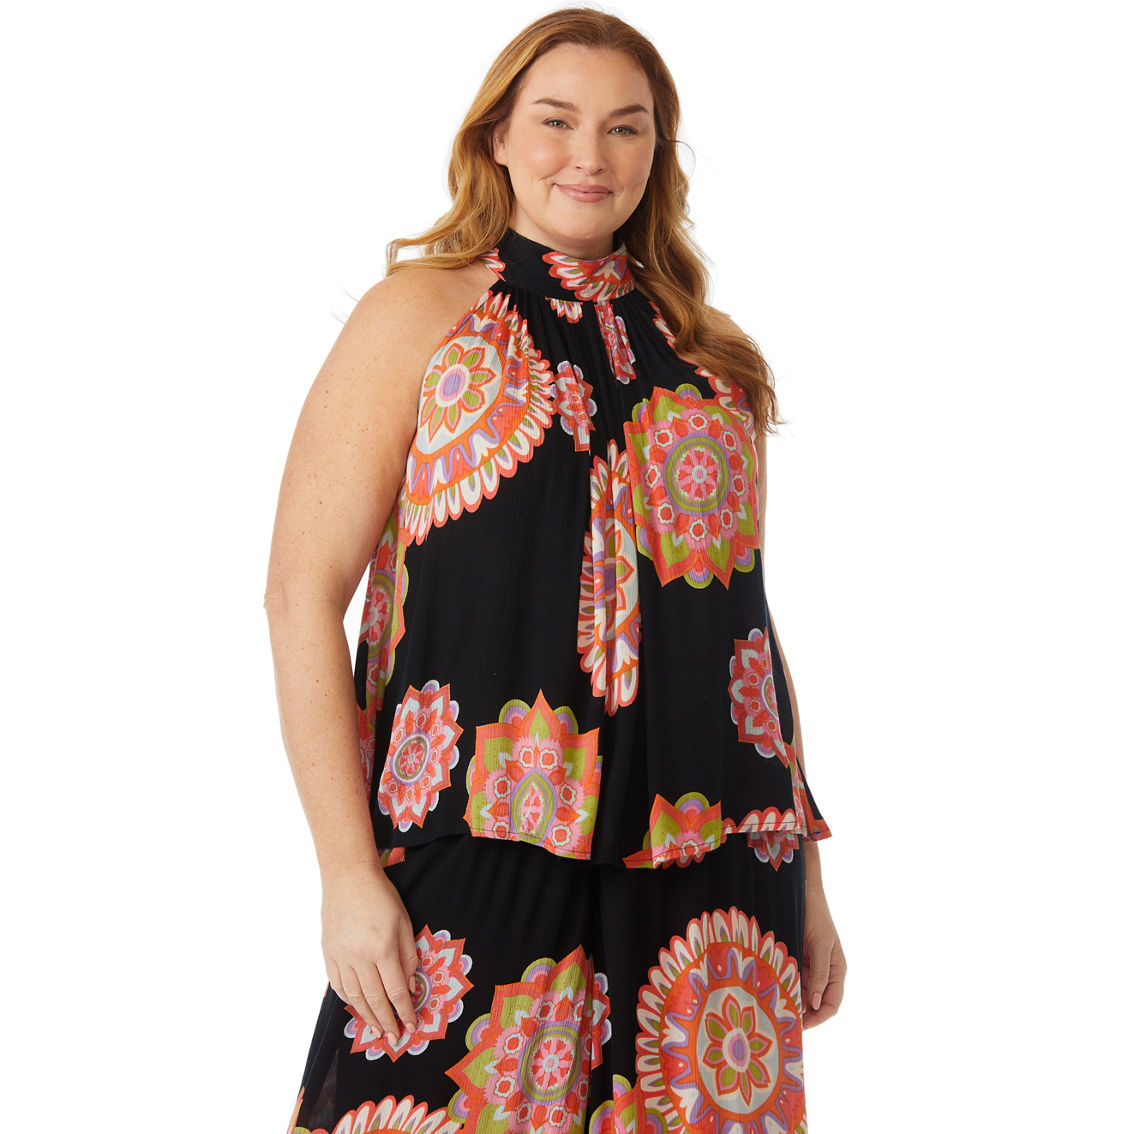 JW Plus Size Woven Print Swing Halter Top - Image 3 of 3